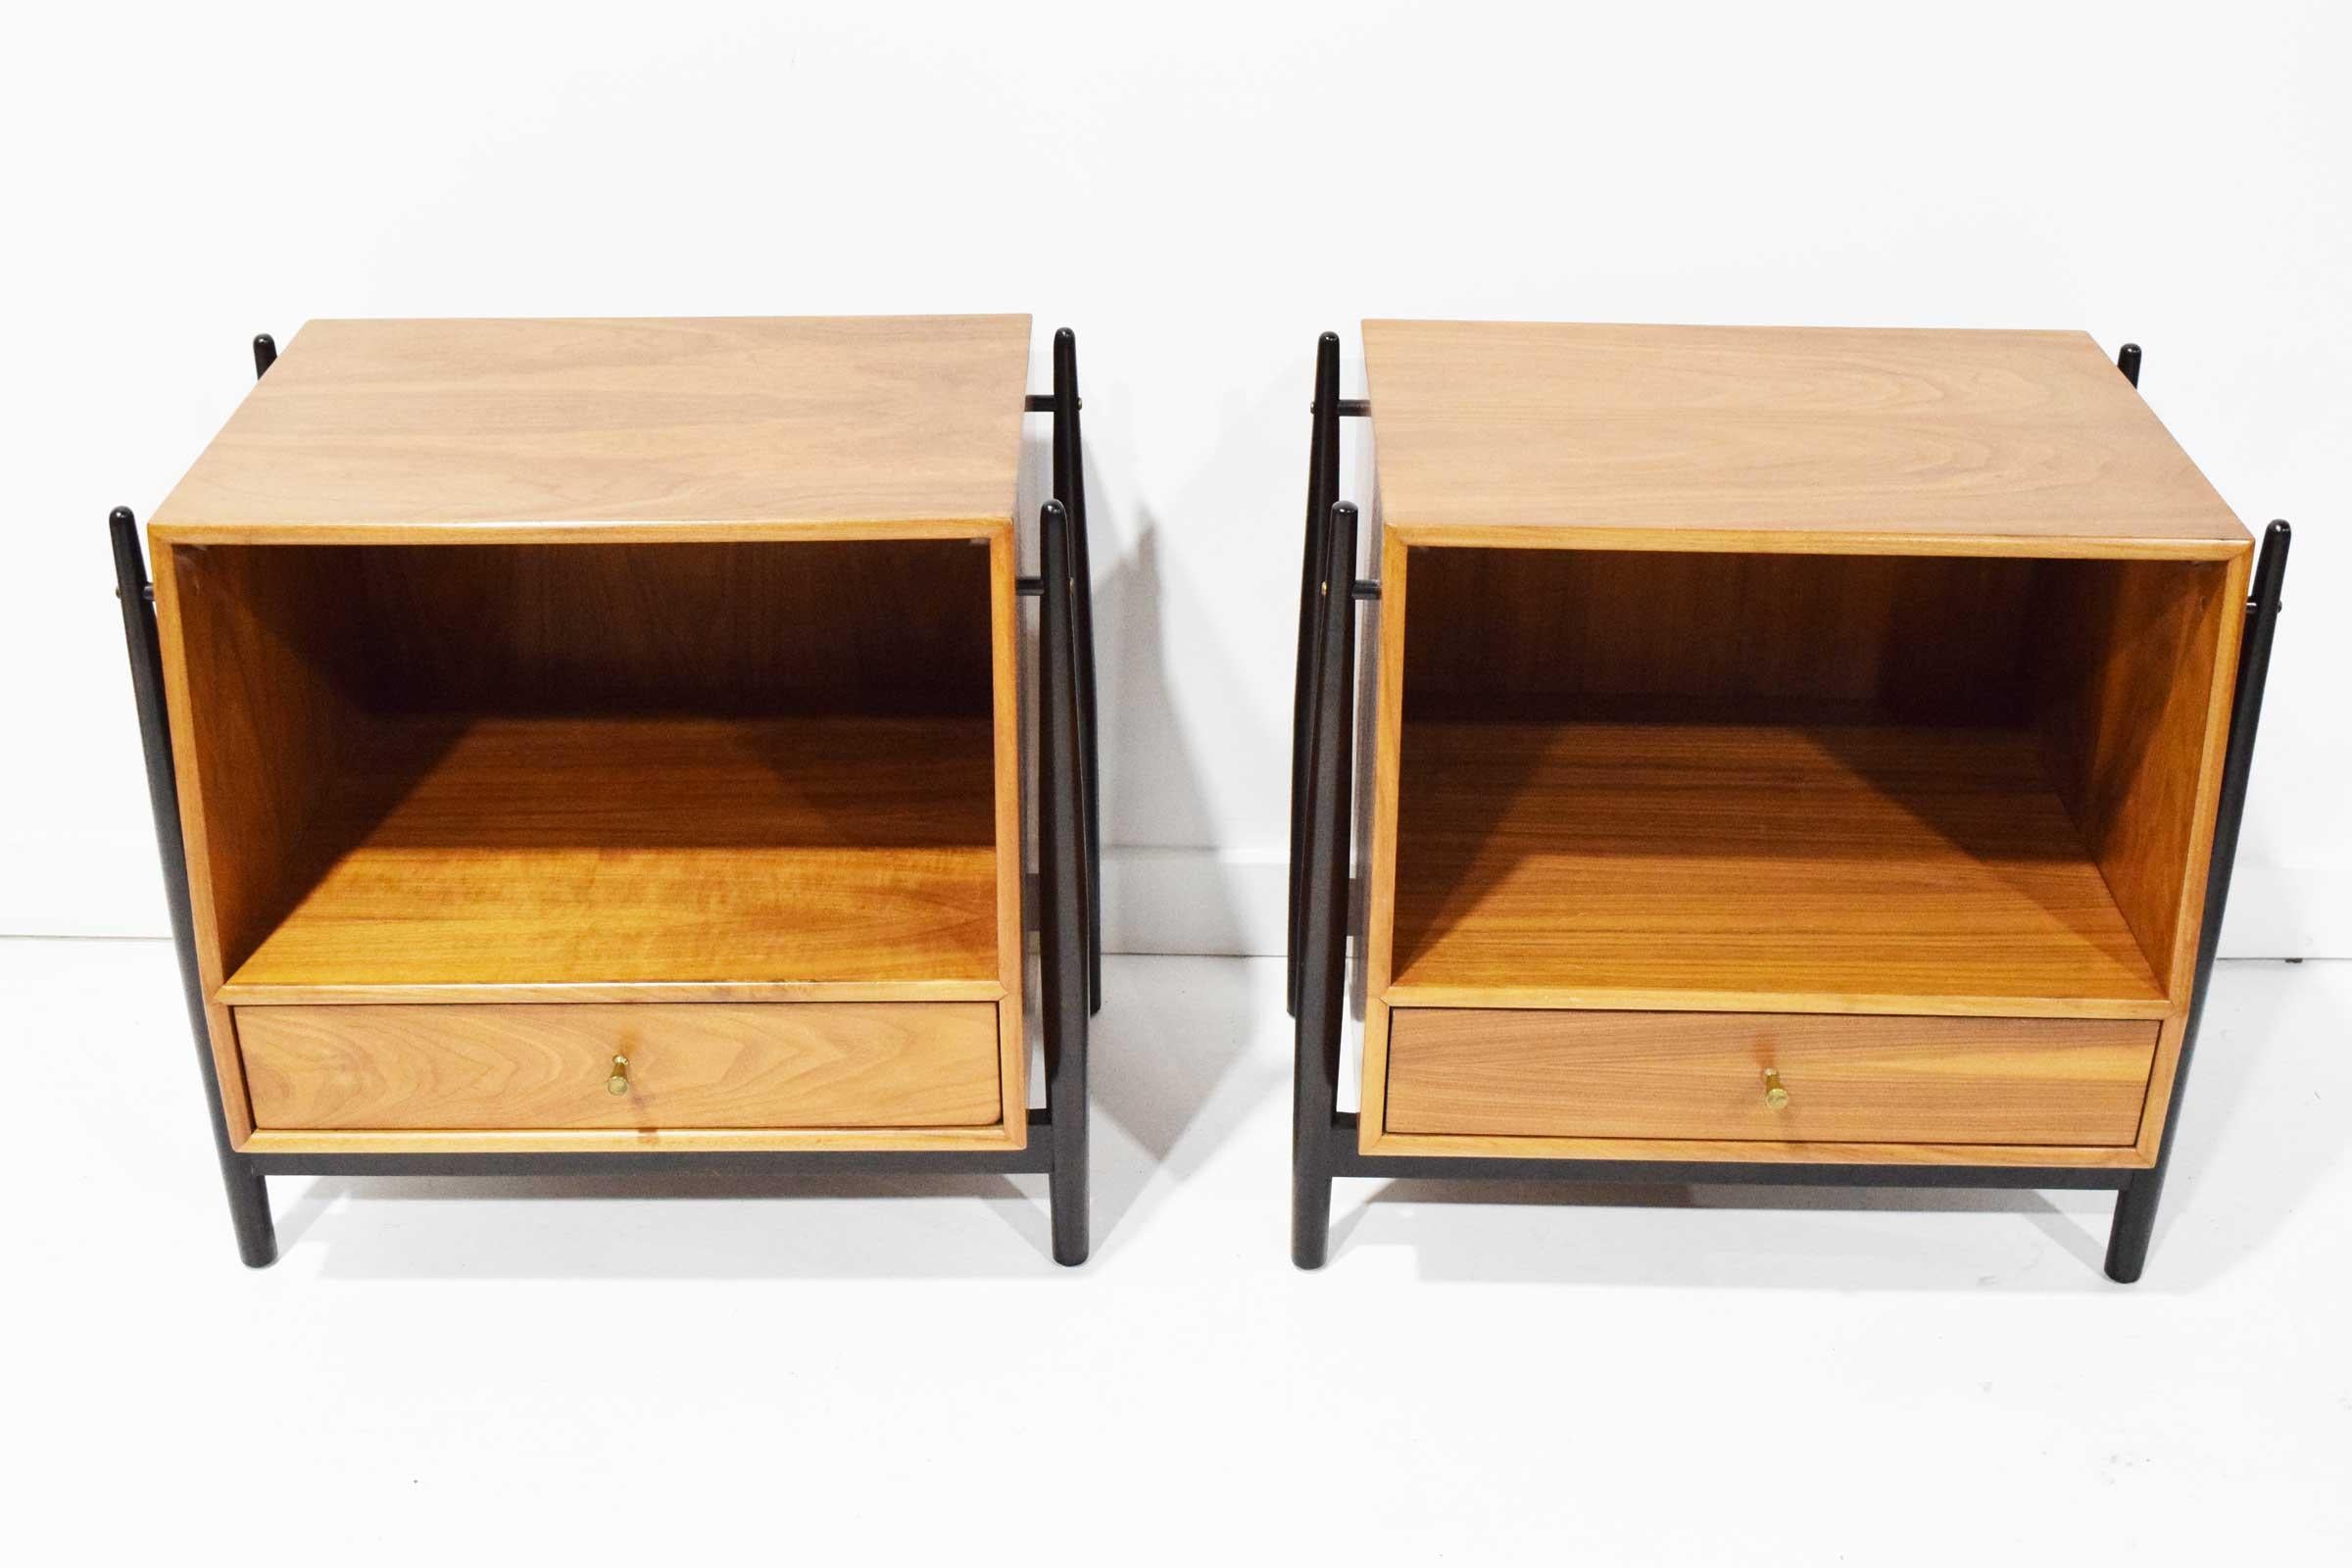 Exceptional pair of Mid-Century Modern nightstands or can also be used as side or end tables, designed by Kipp Stewart and Stewart McDougall as part of the 'Declaration' line for Drexel furniture. This design being the most coveted and in-demand of